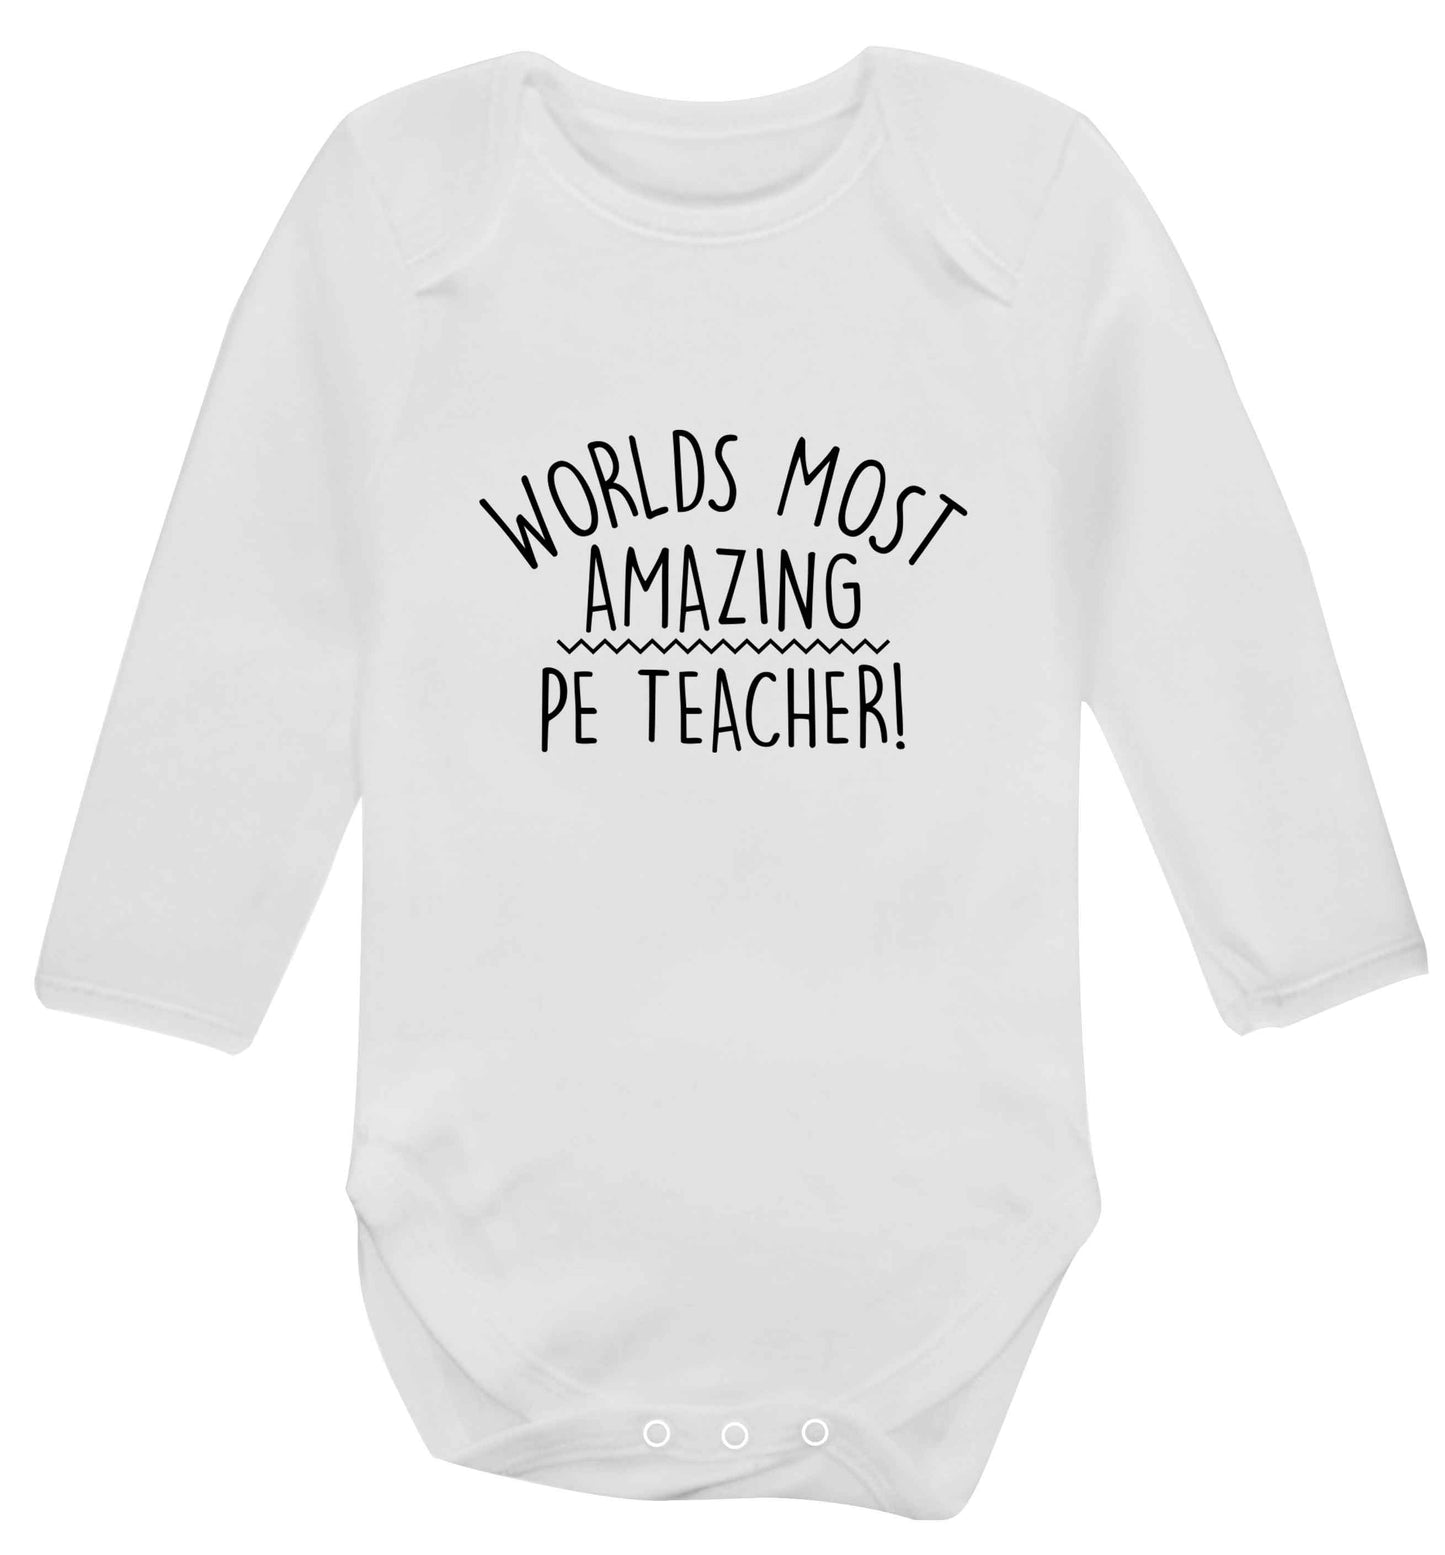 Worlds most amazing PE teacher baby vest long sleeved white 6-12 months